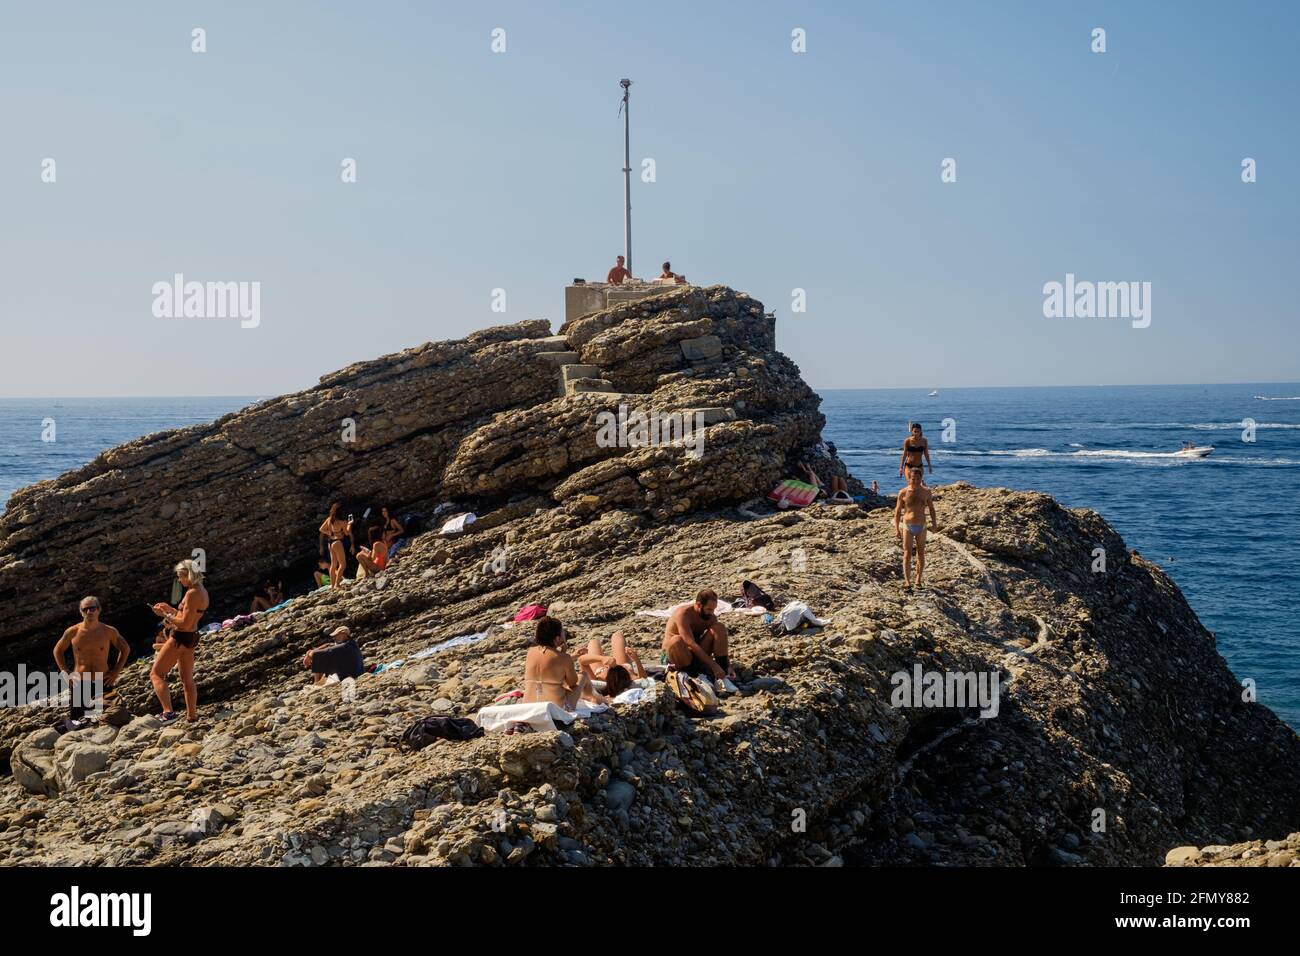 People are sunbathing on a rocky beach in Liguria. This unique location is Punta Chiappa near Camogli. Stock Photo